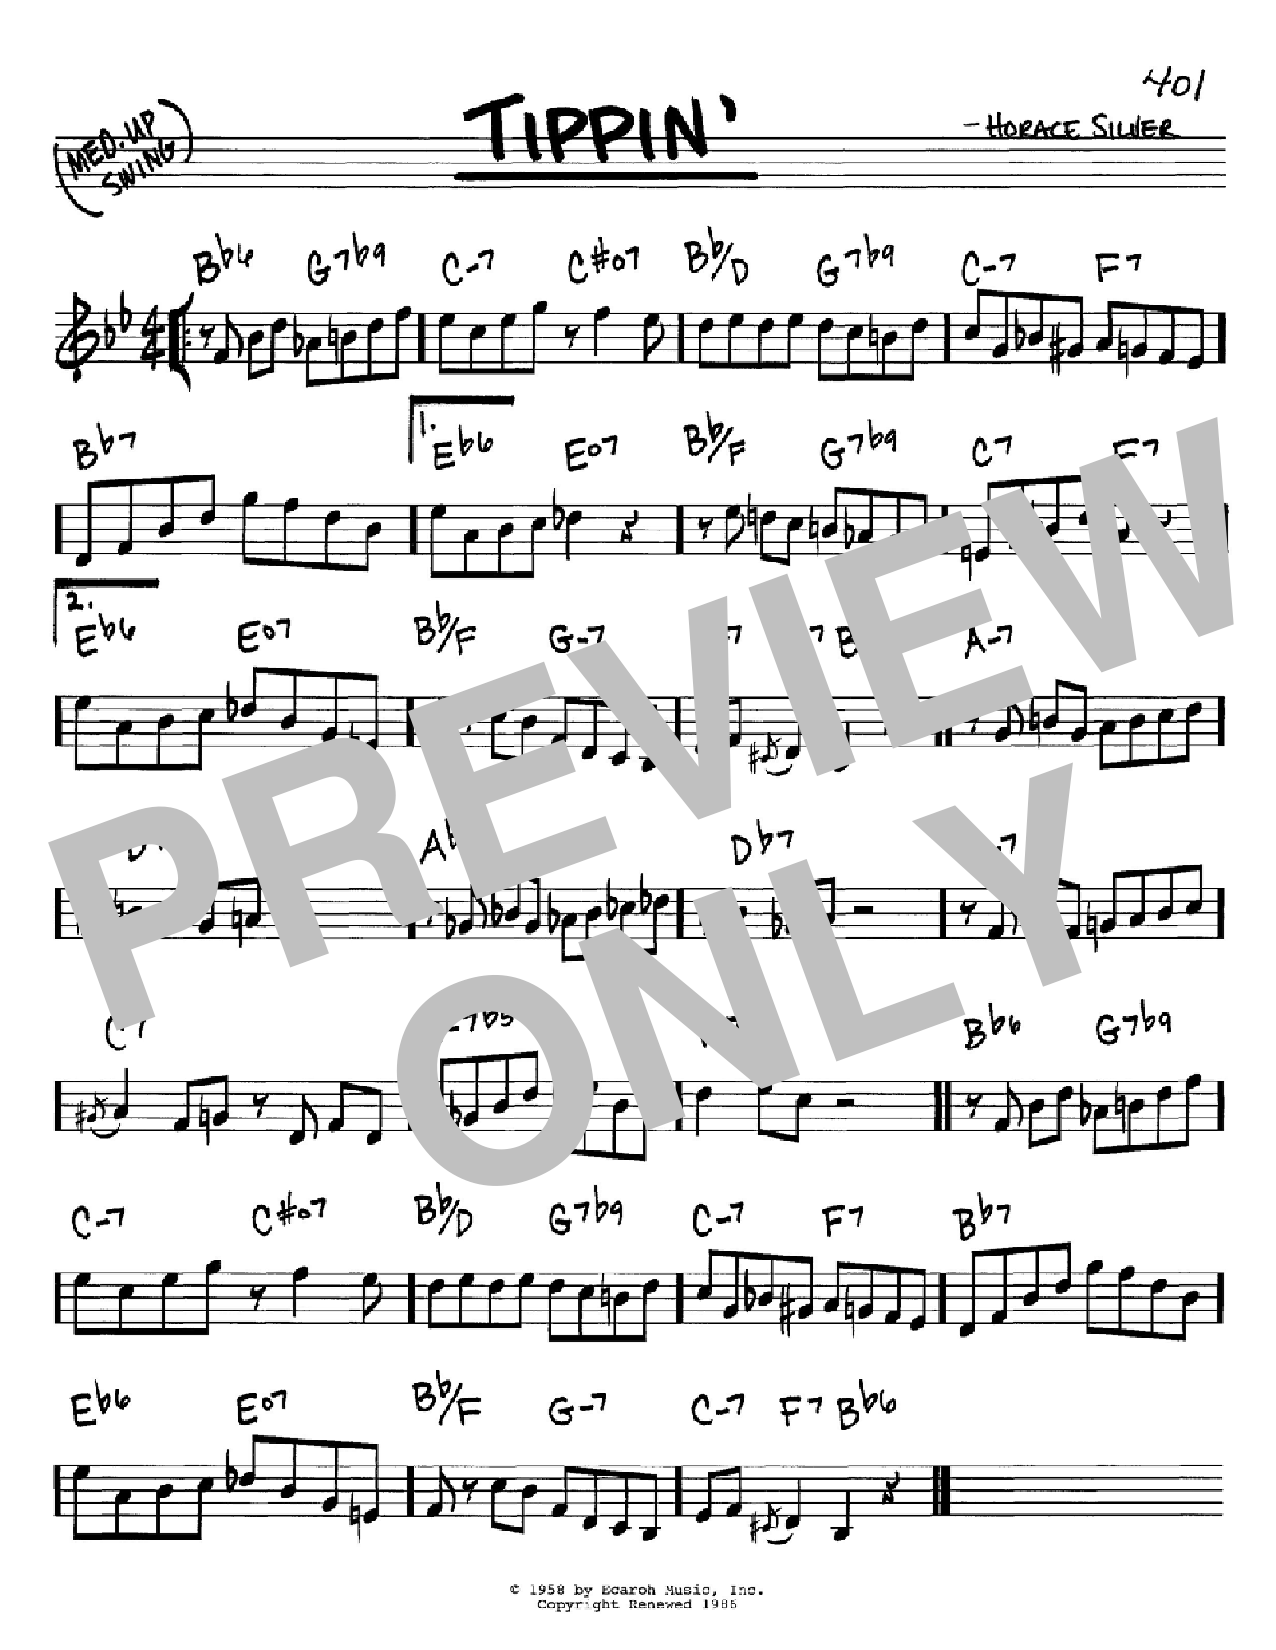 Download Horace Silver Tippin' Sheet Music